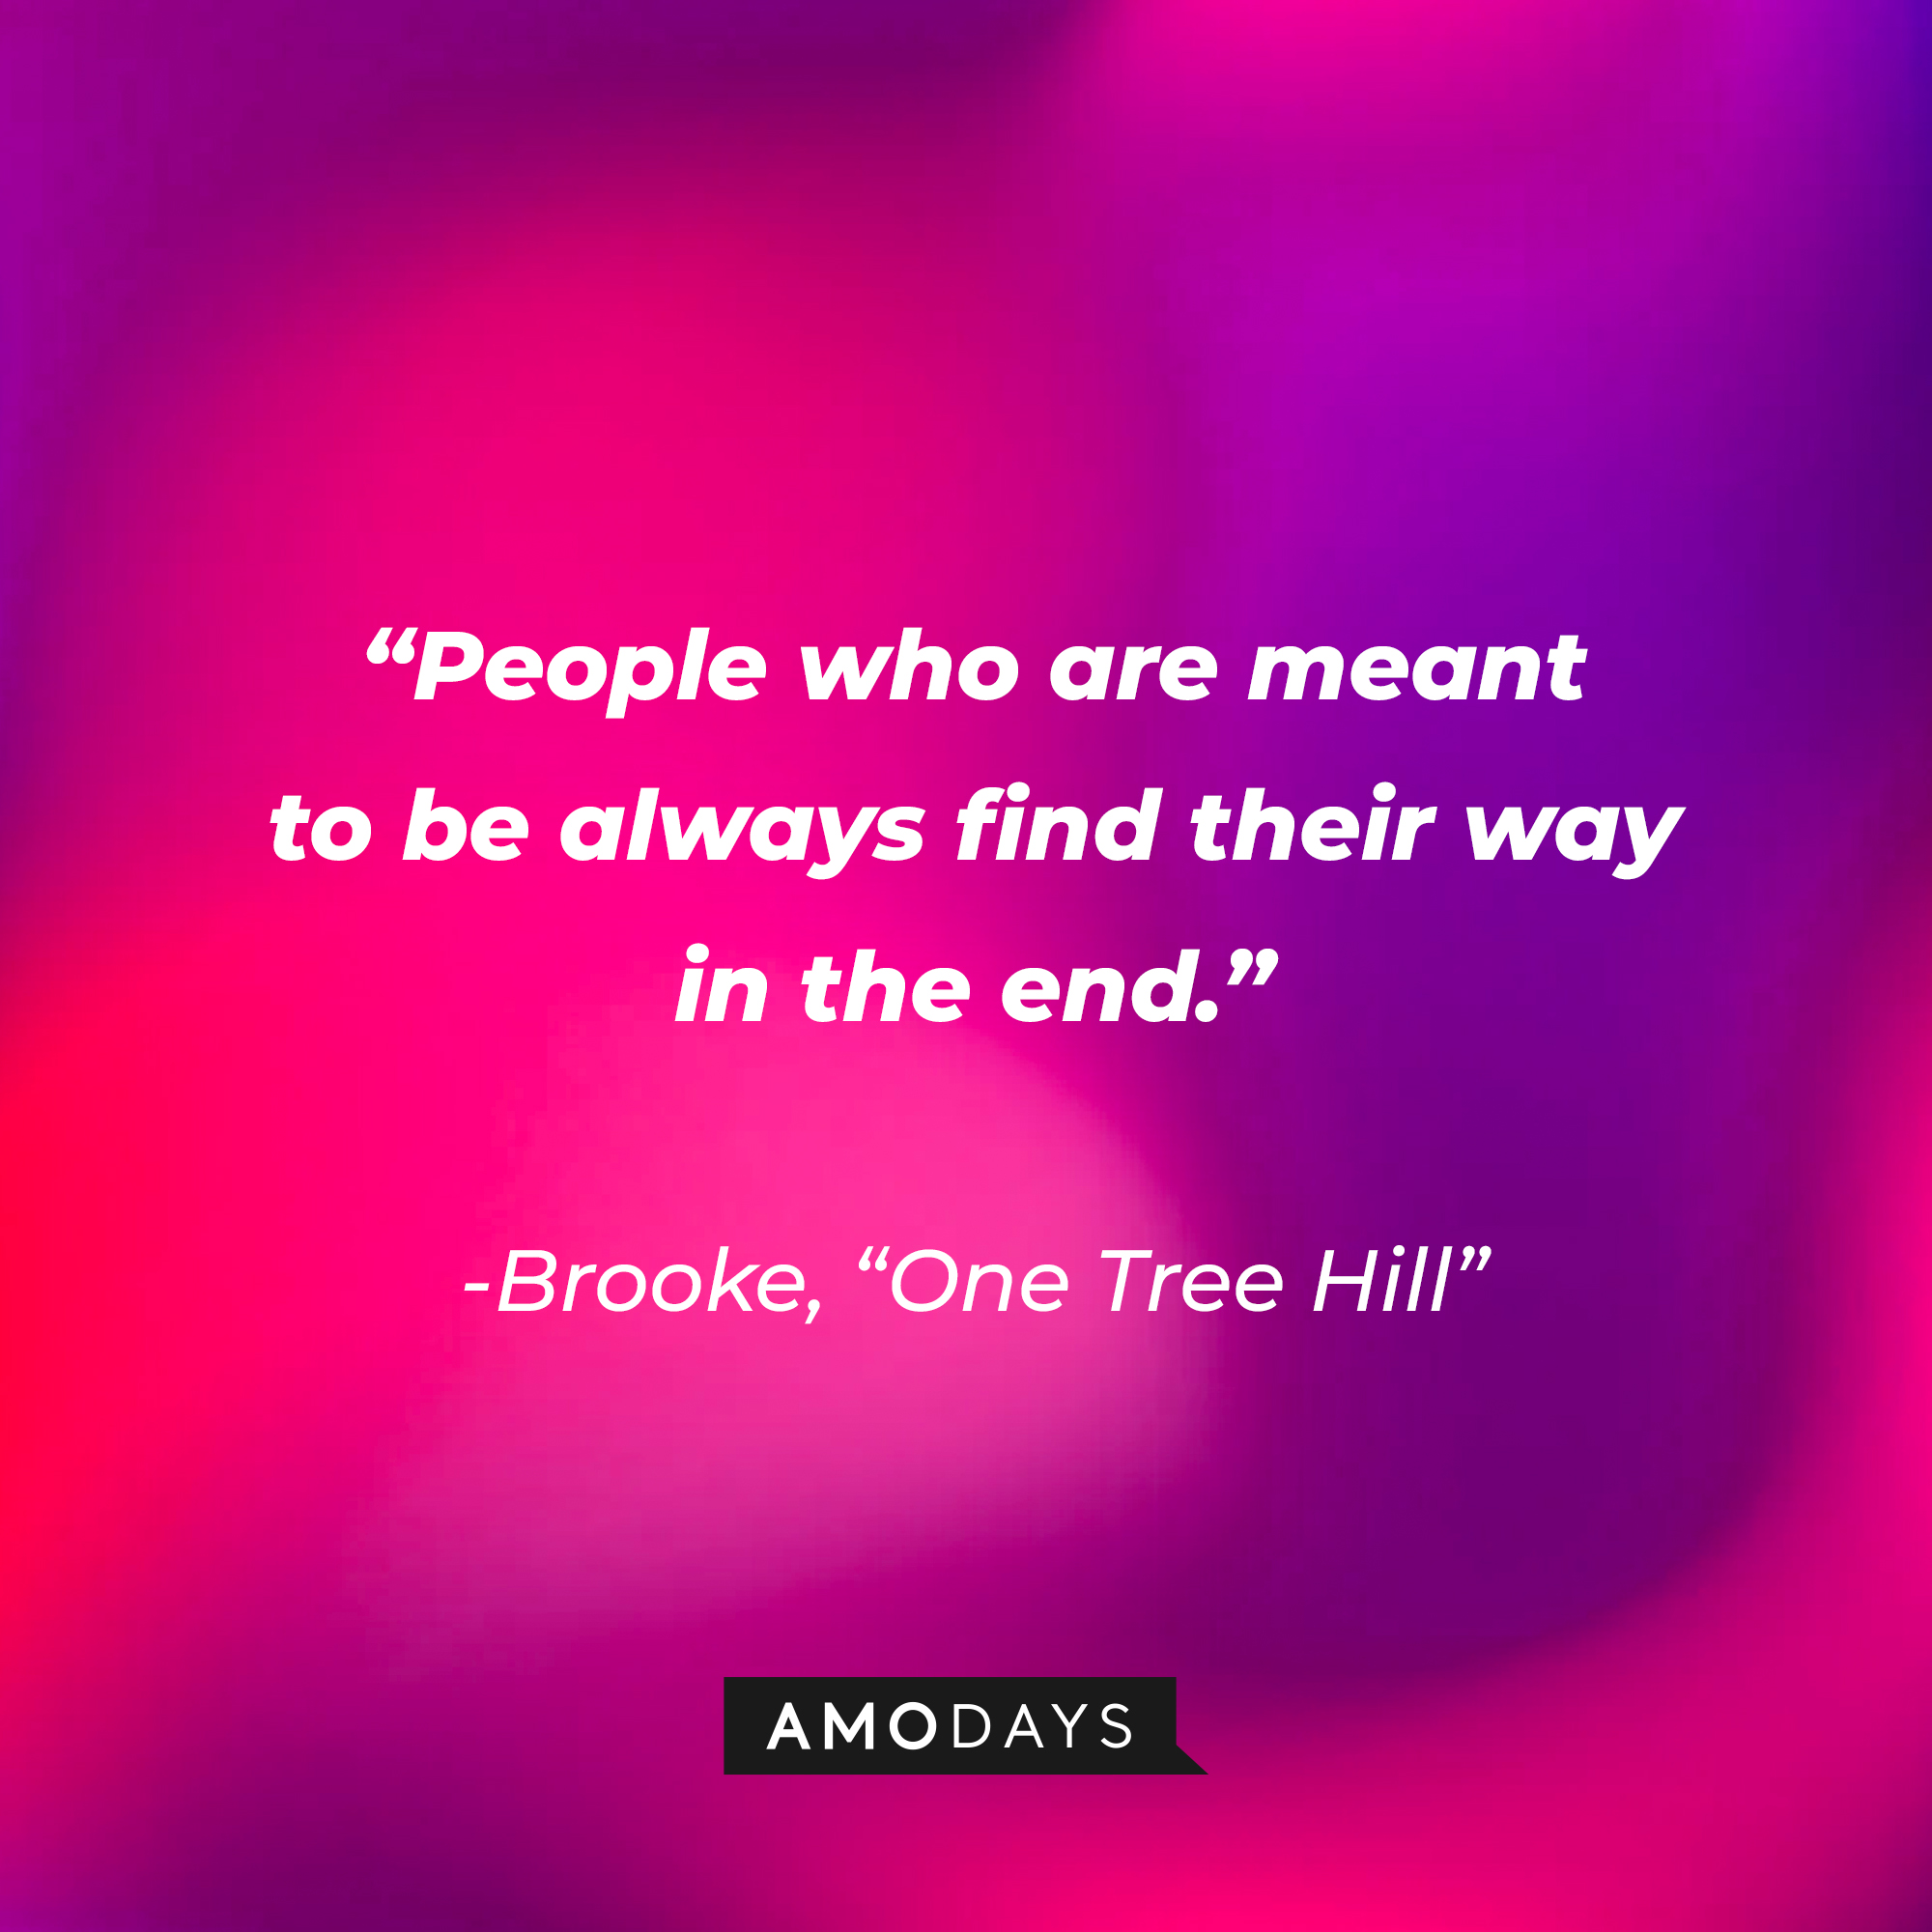 Brooke’s quote from “One Tree Hill”: “People who are meant to be always find their way in the end.” | Source: AmoDays